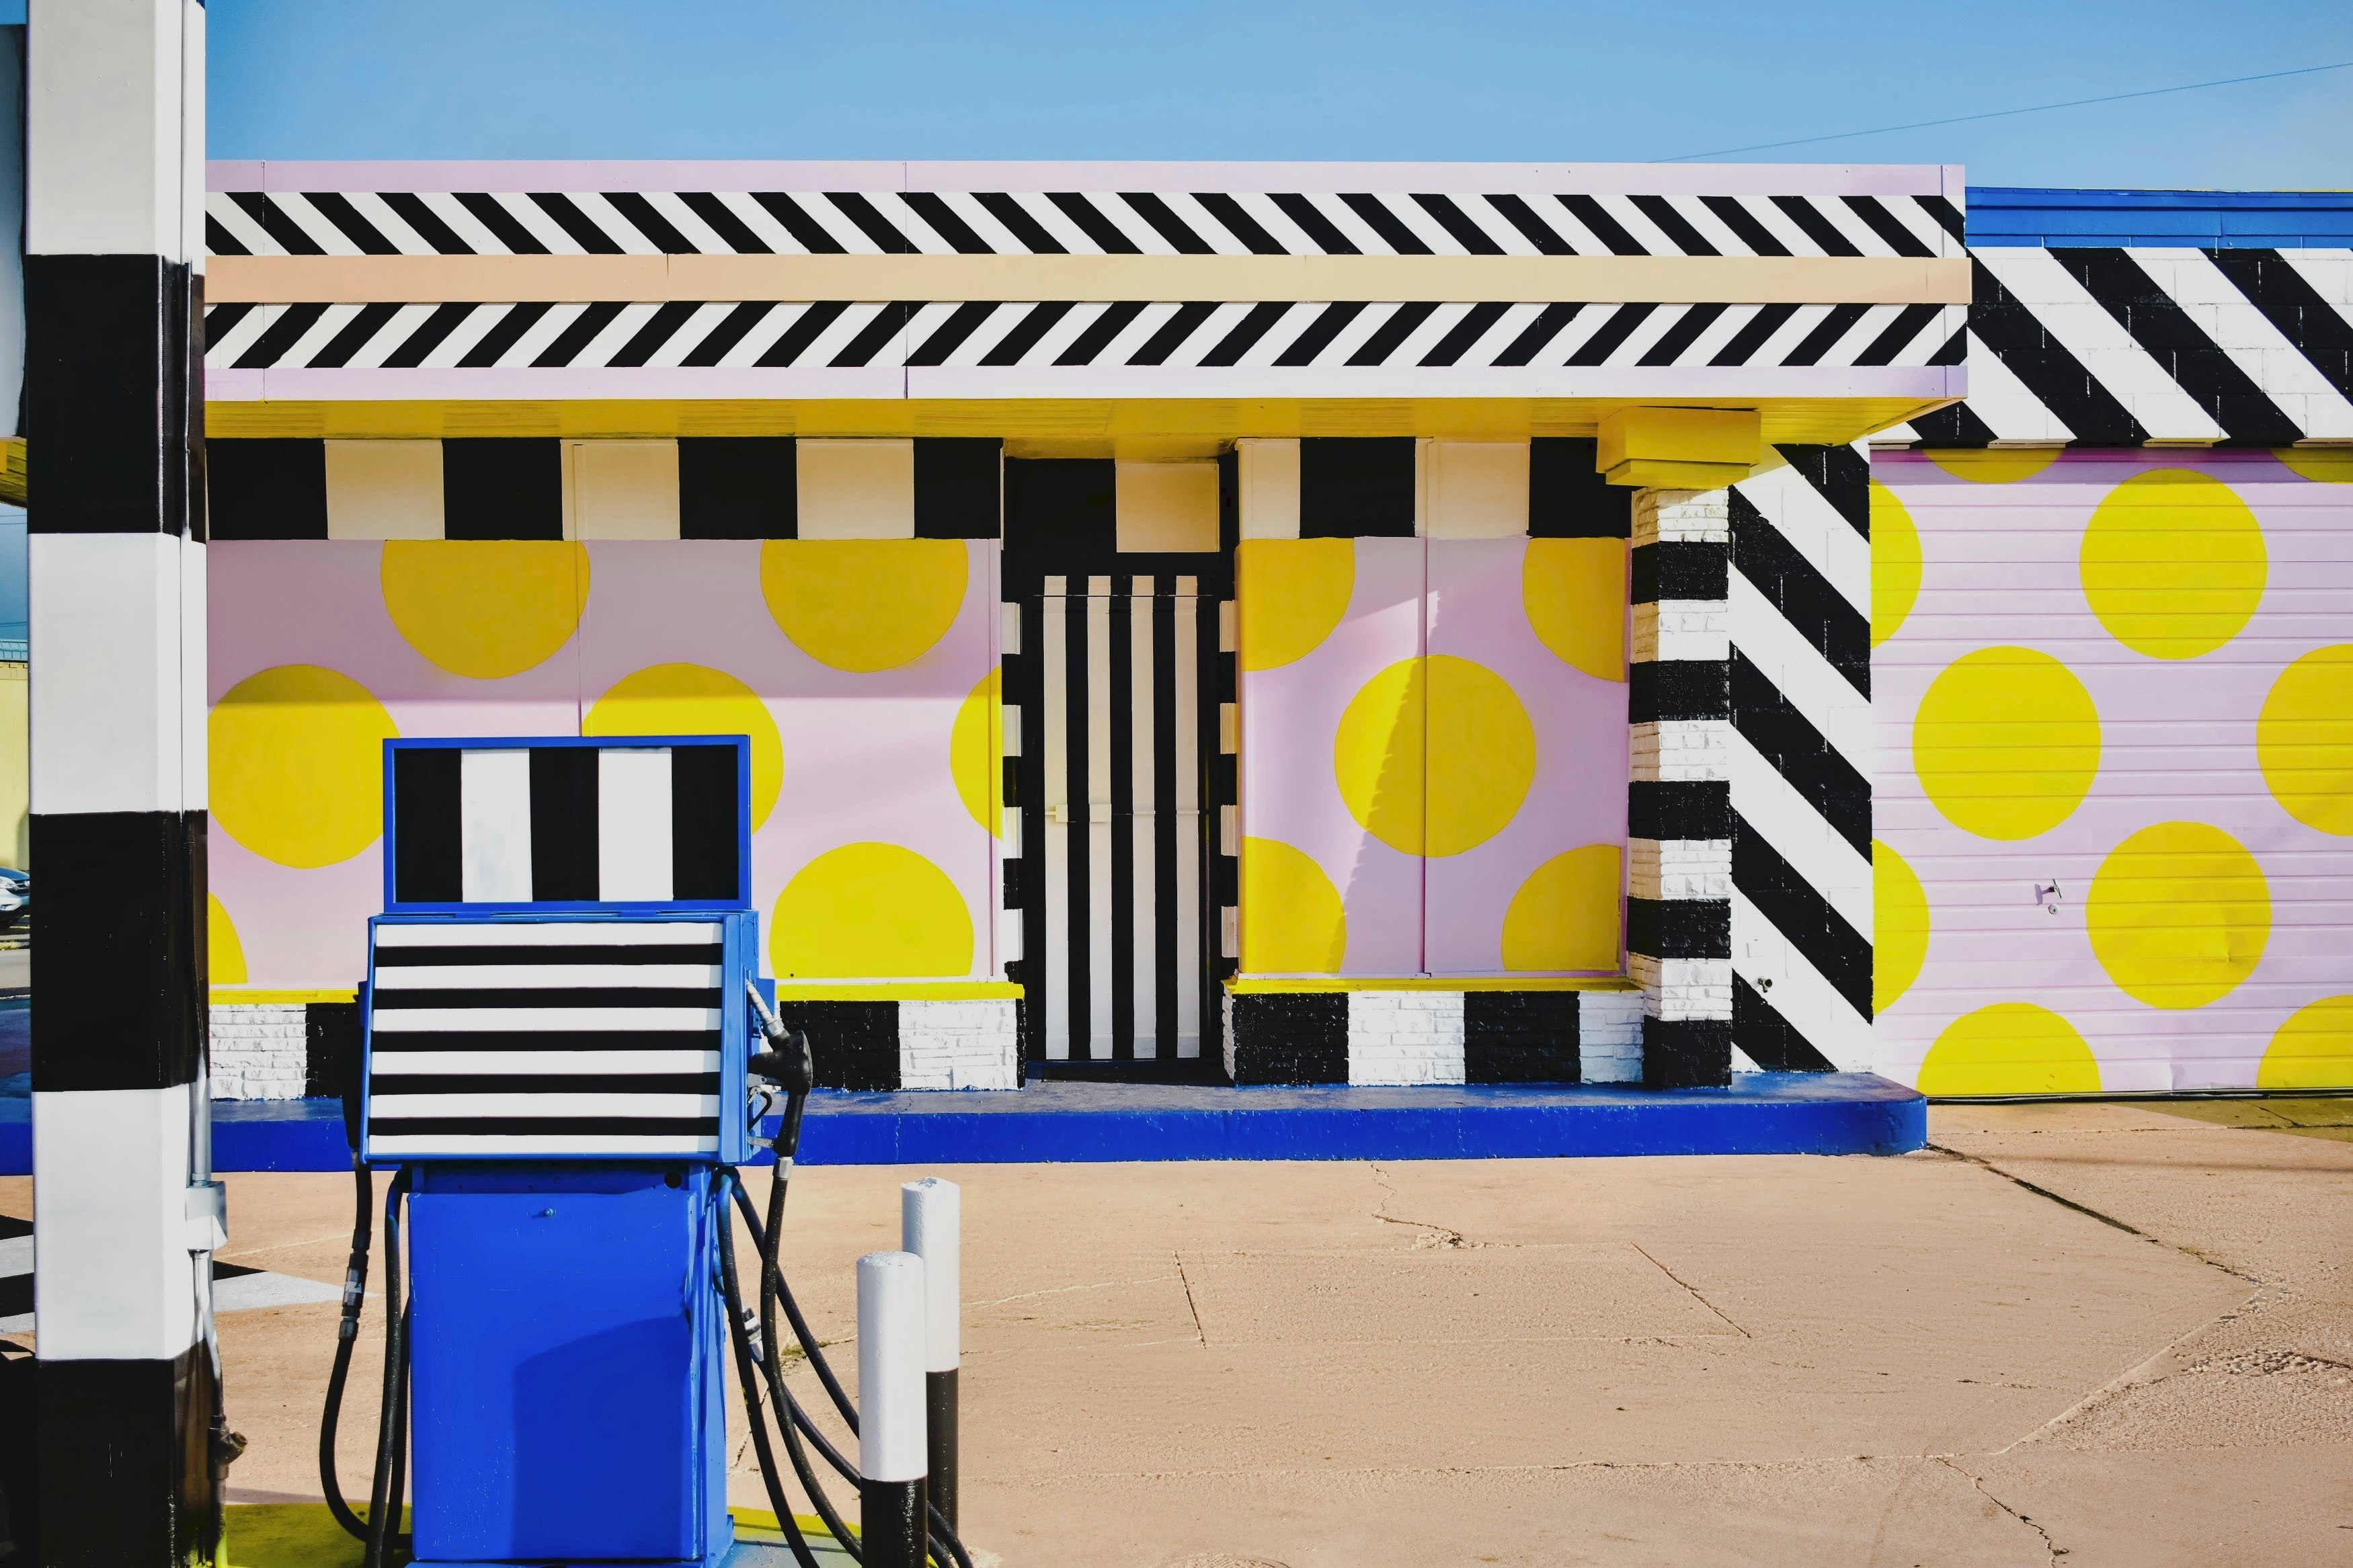 A detail of the gas pump, with a pattern of black and white stripes and yellow polka dots